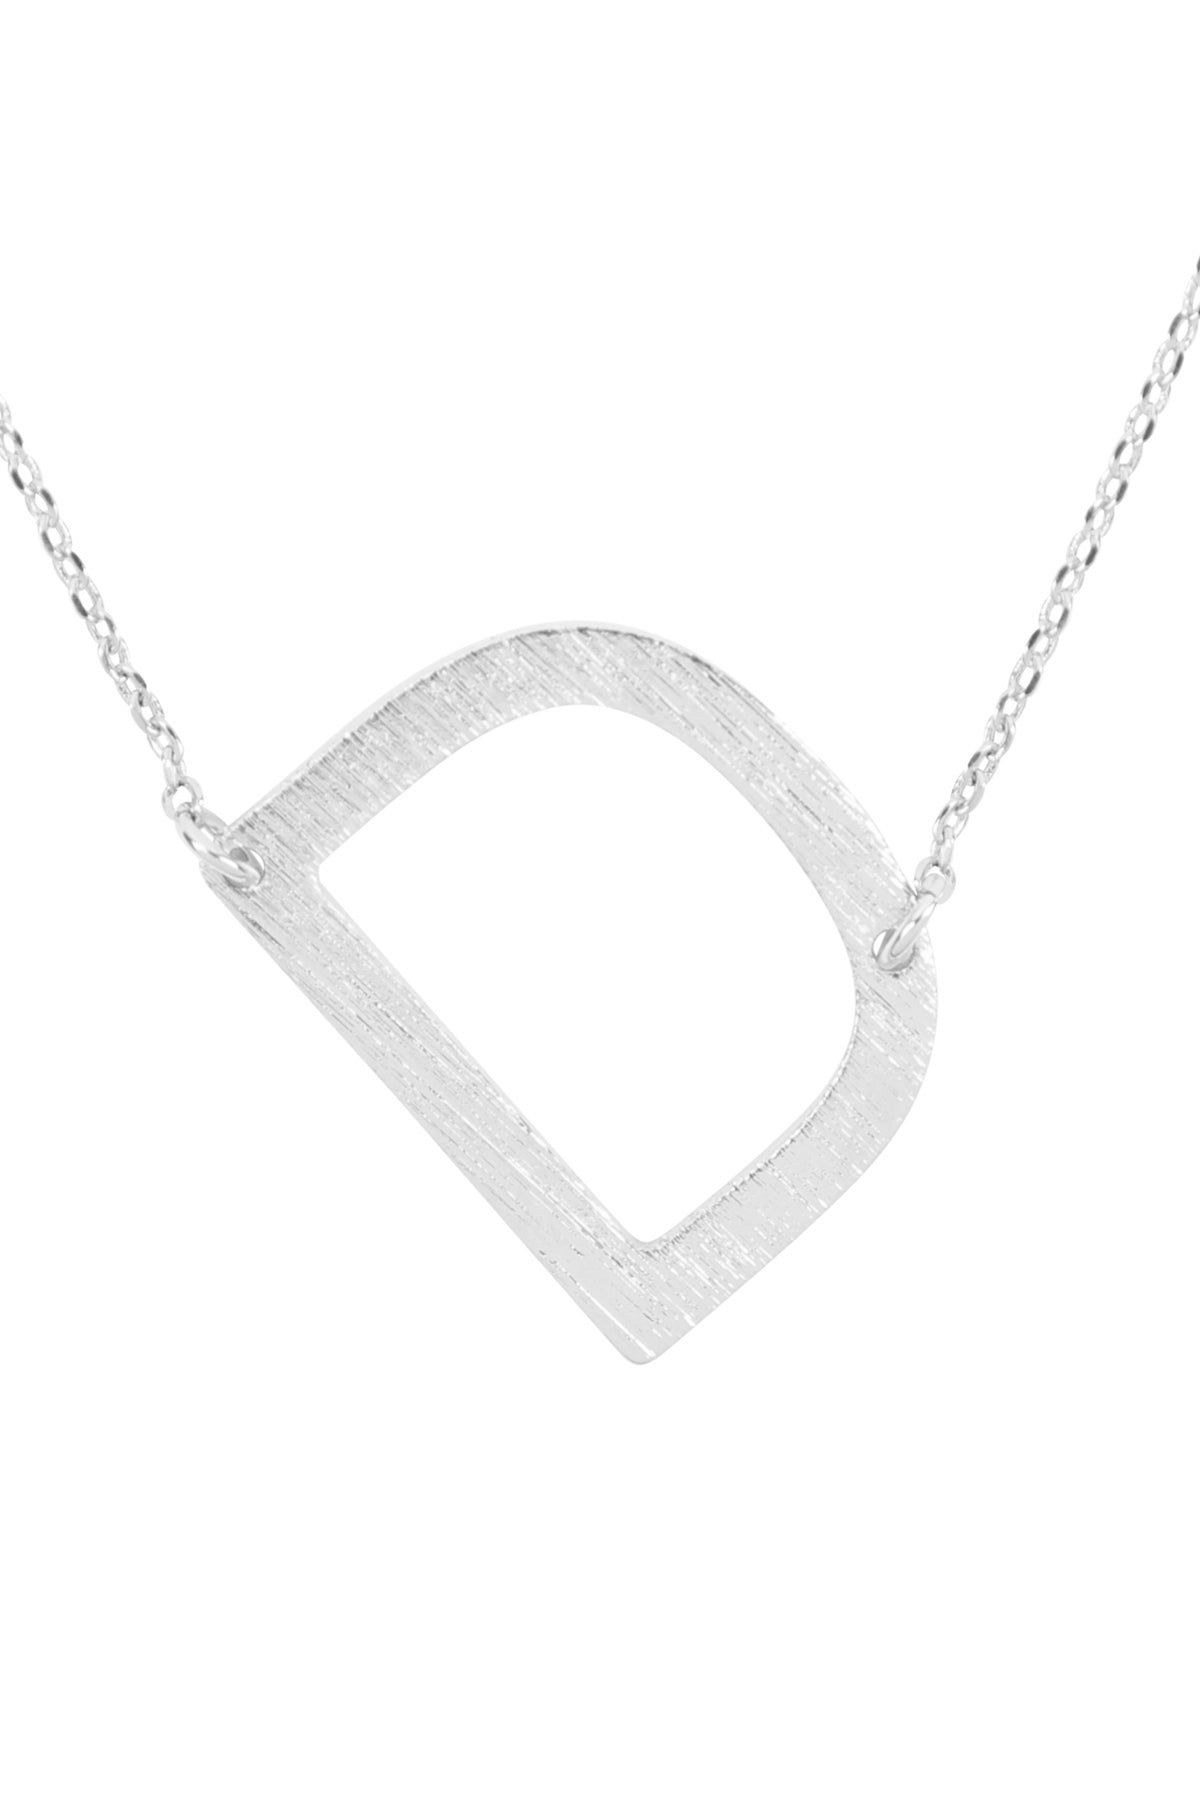 "D" INITIAL ROUGH FINISH CHAIN NECKLACE